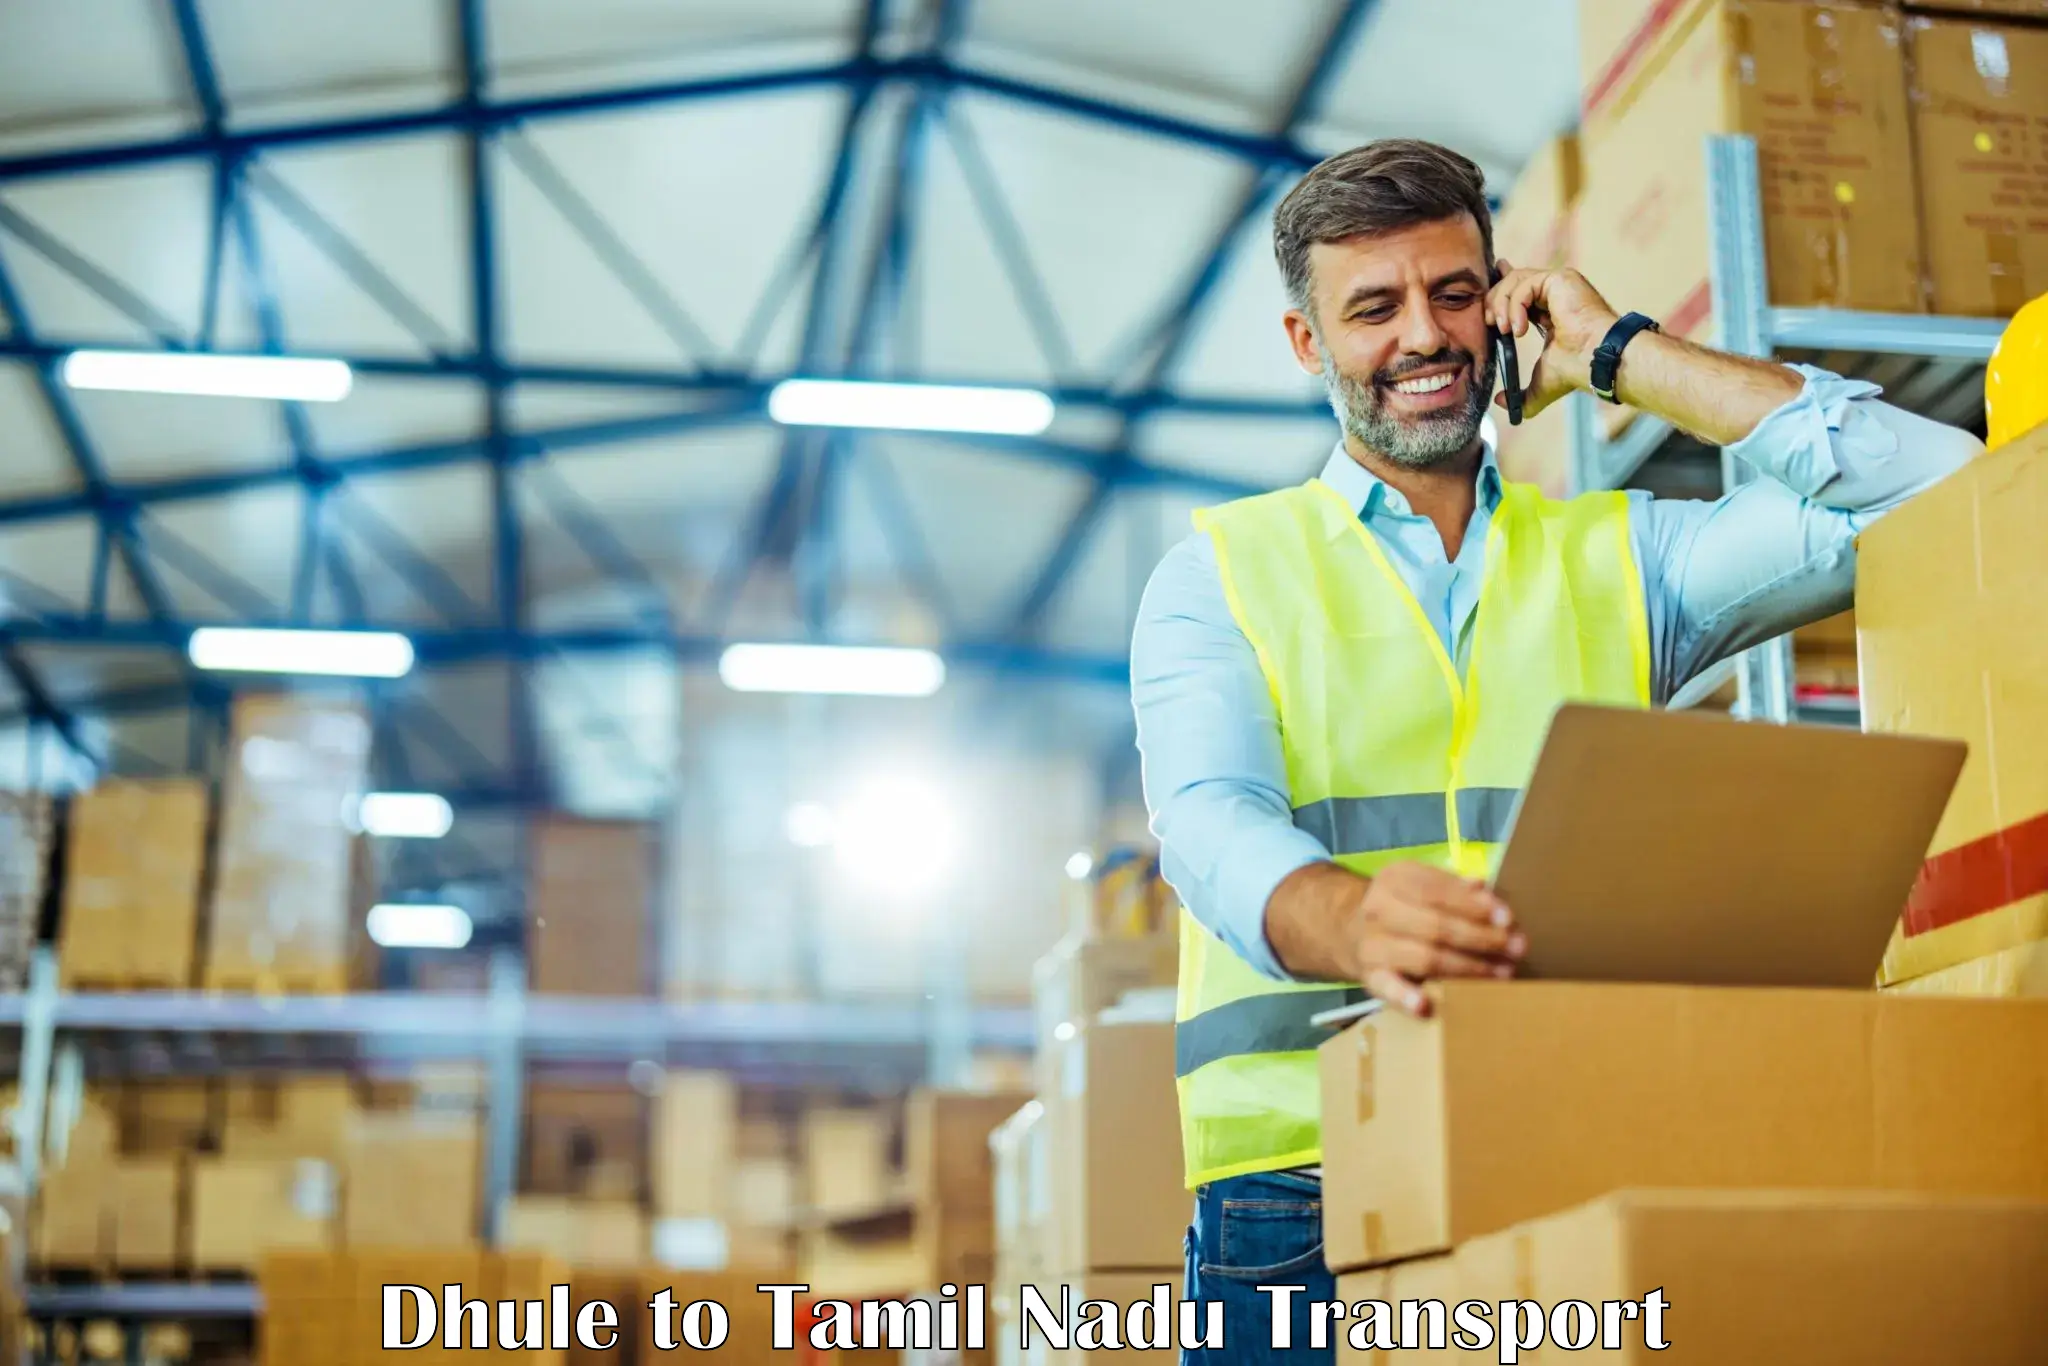 Part load transport service in India Dhule to Ennore Port Chennai